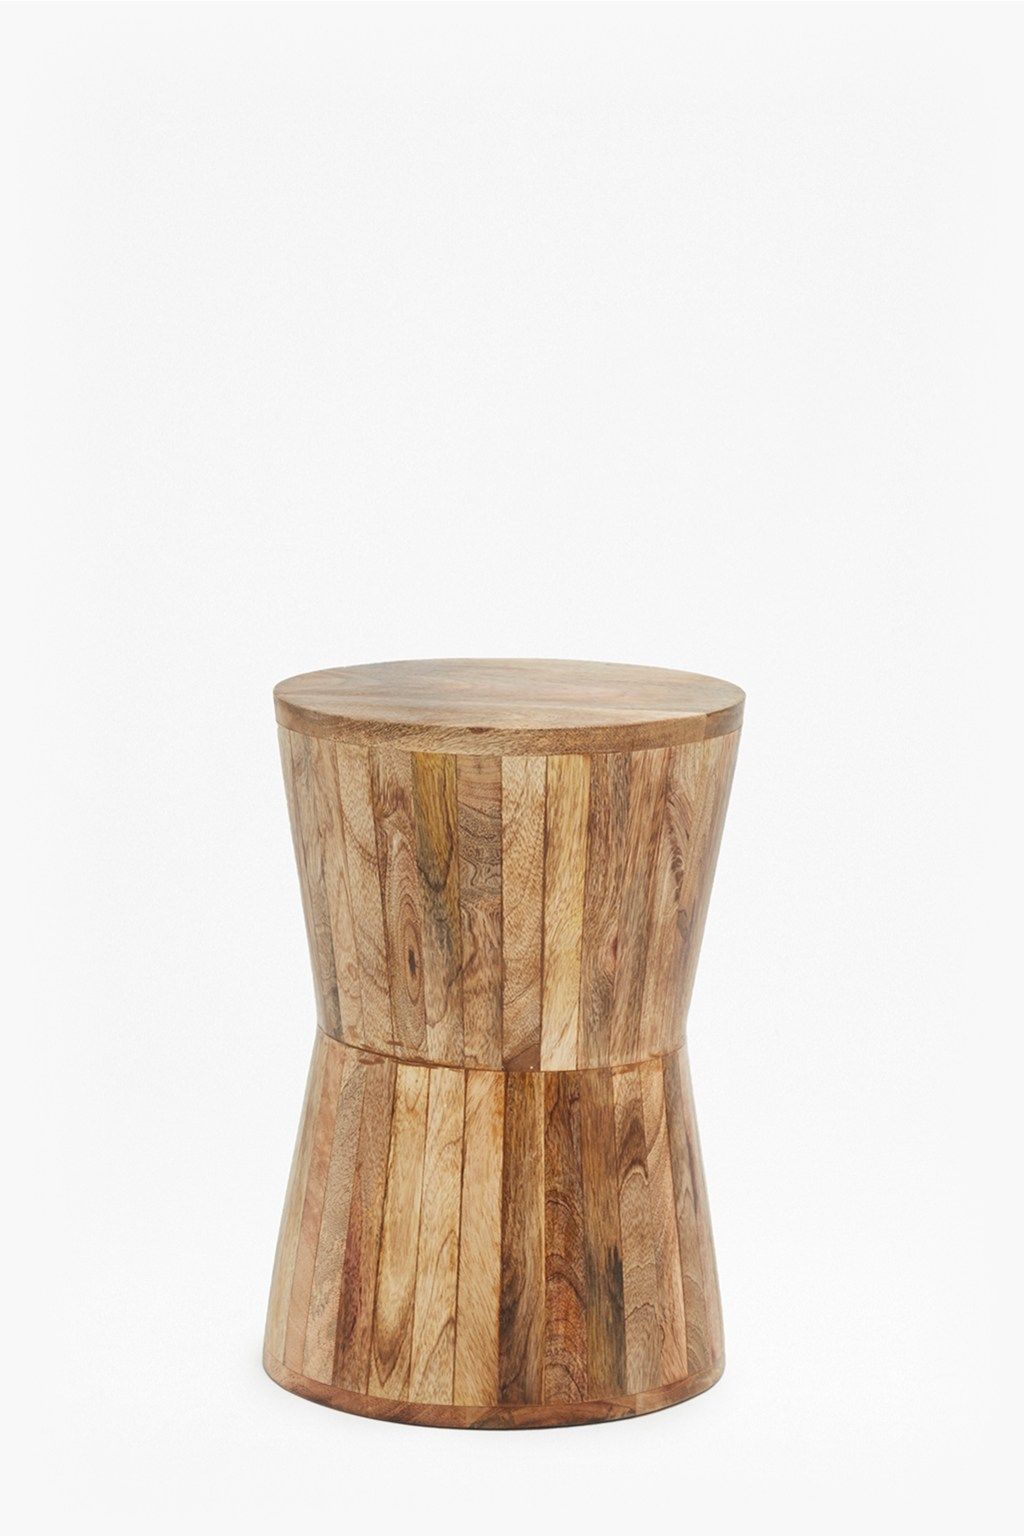 16 Small Side Tables Perfect For, Small Short Round End Table